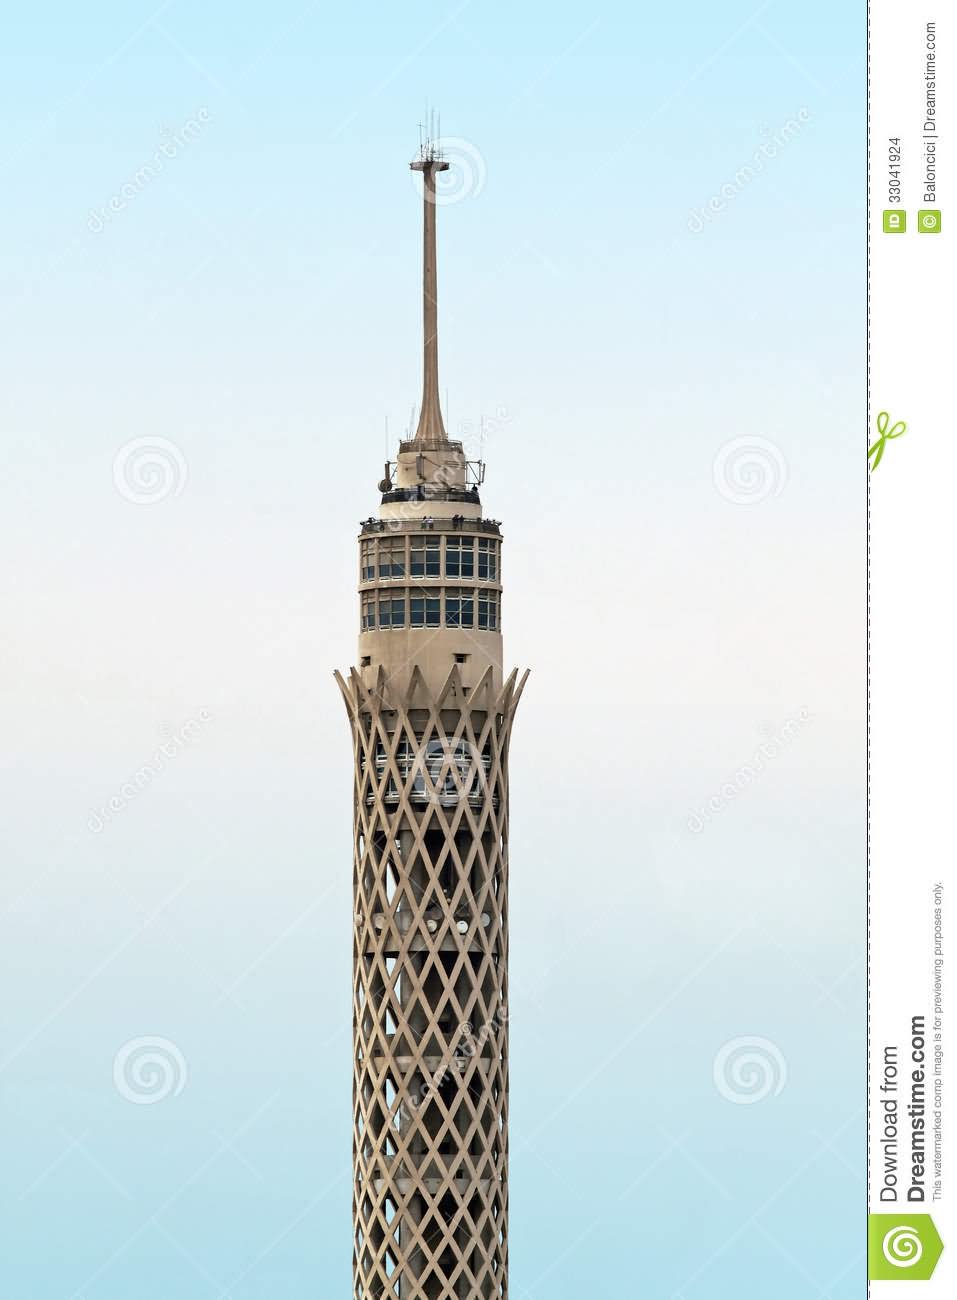 Cairo Tower Picture